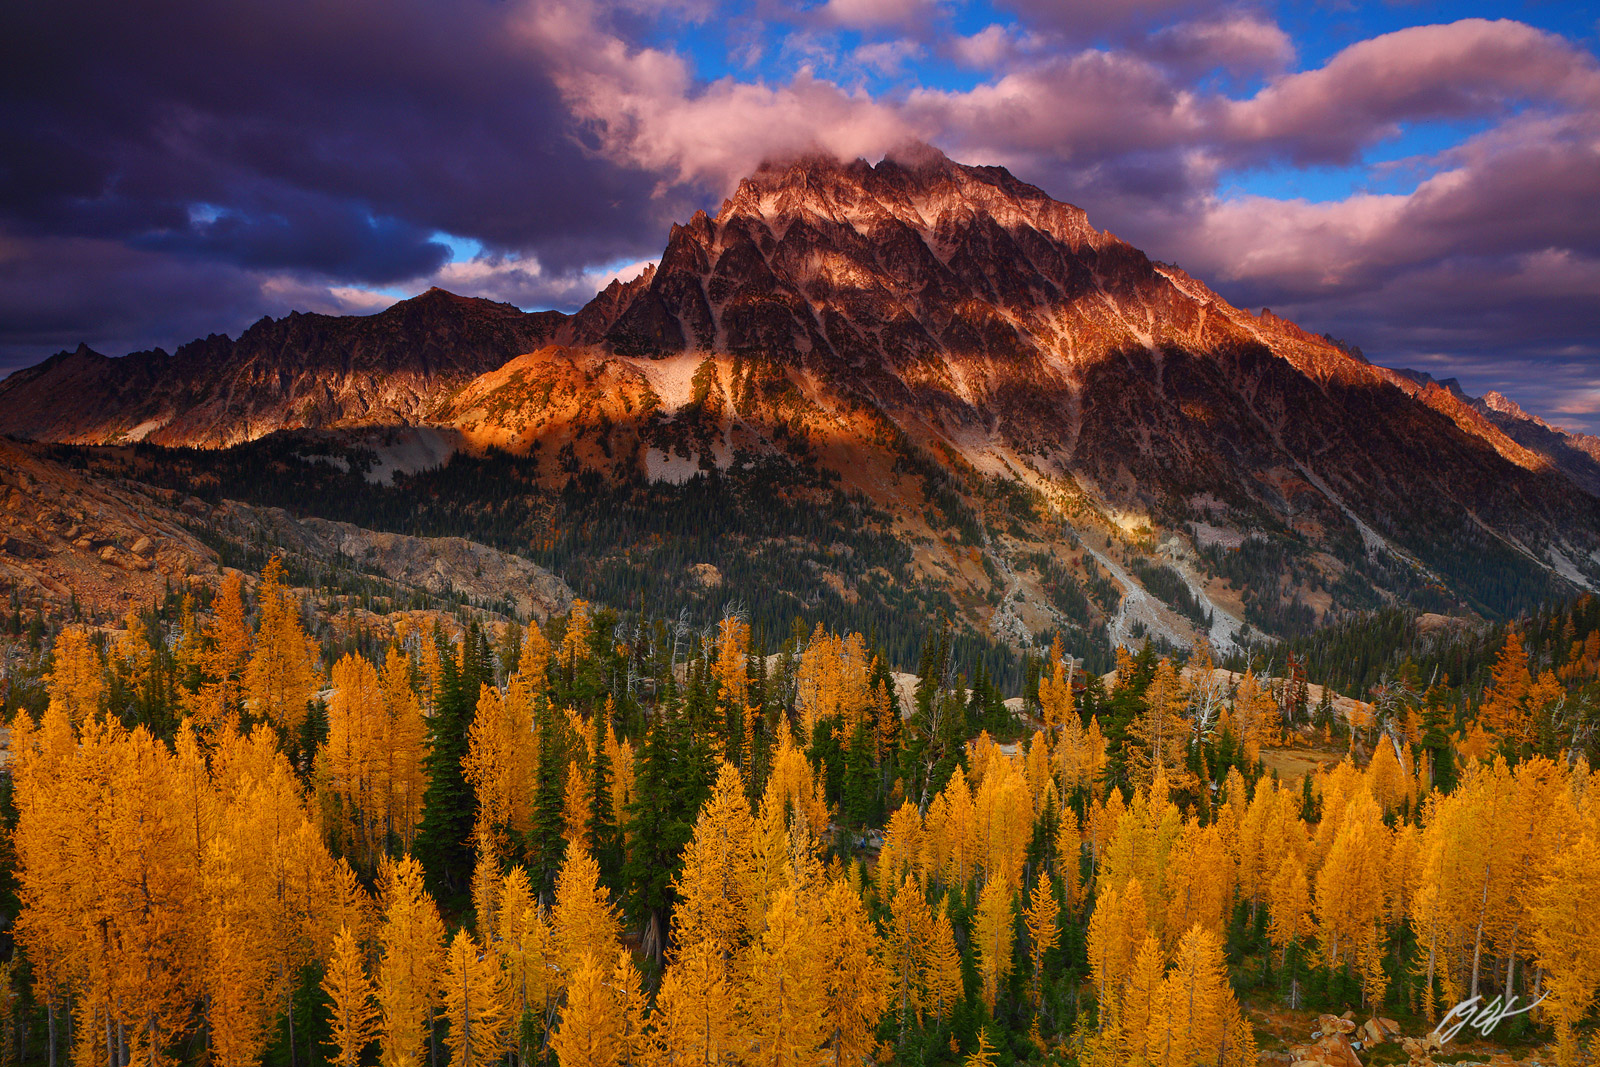 Sunset Golden Larch and Mt Stuart from the Lake Ingalls Trail in the alpine Lakes Wilderness, in Washington